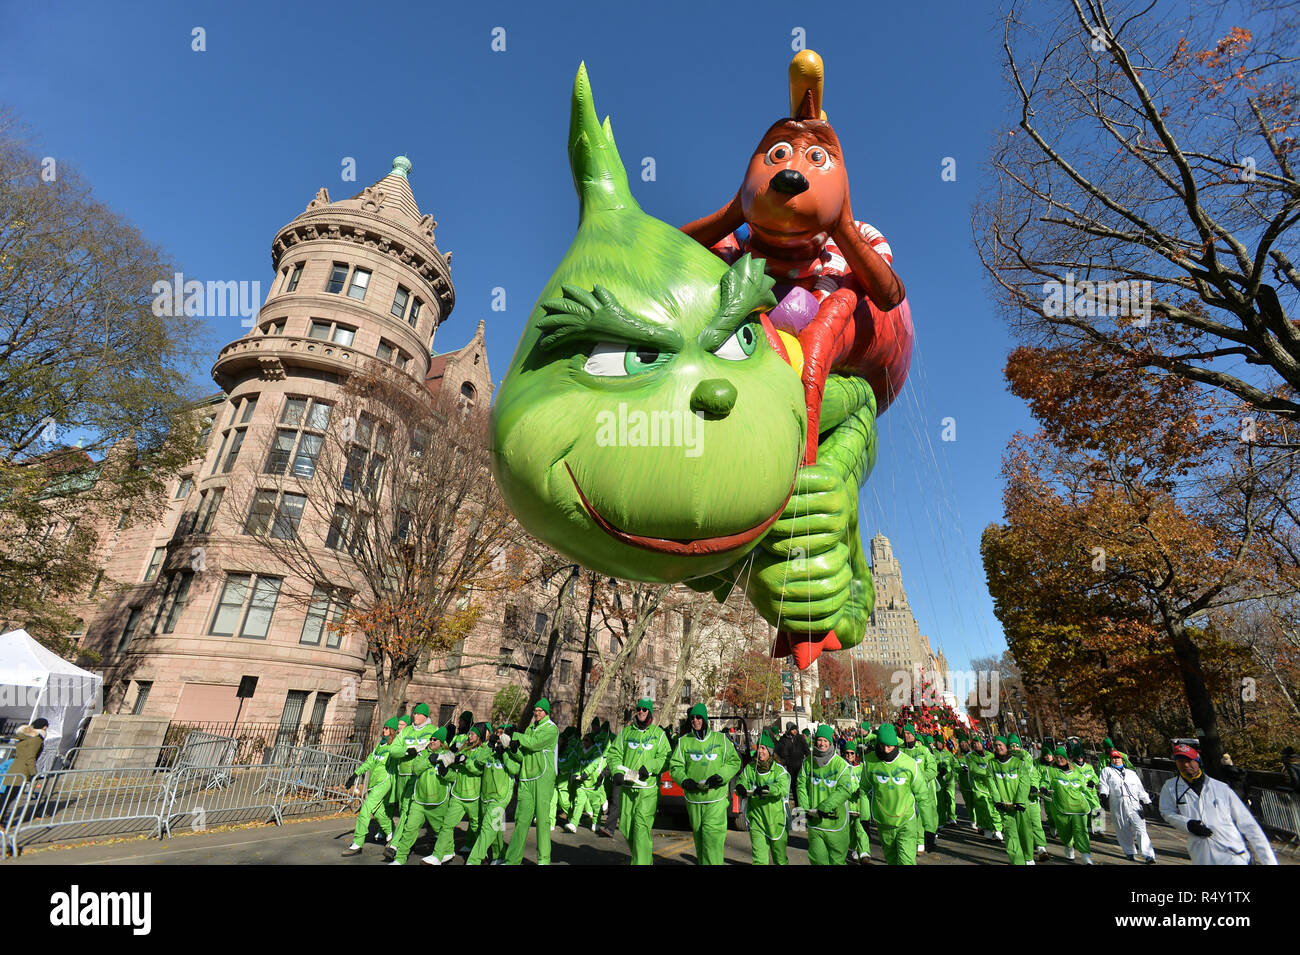 The Grinch balloon at the 92nd Annual Macy’s Thanksgiving Day Parade in New York on Nov. 22, 2018. Stock Photo